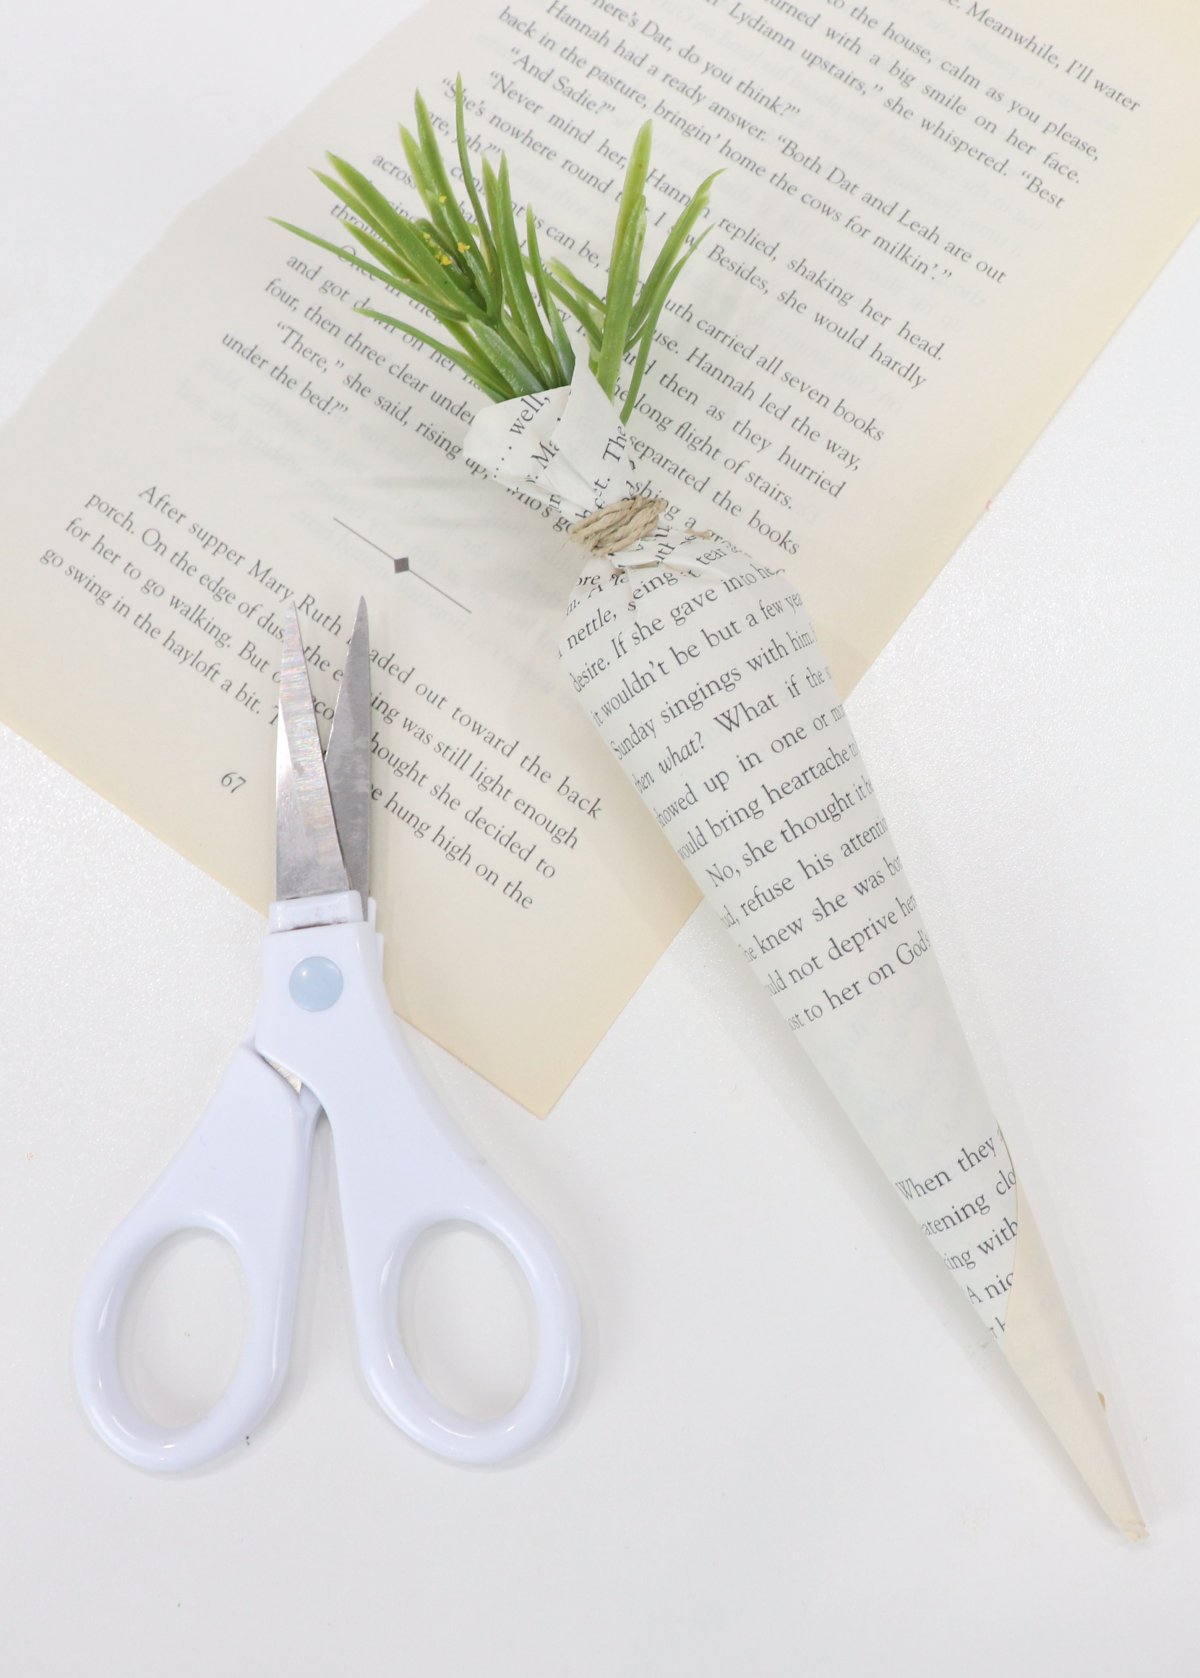 Image contains a book page, a book page carrot, and a pair of white-handled scissors on a white background.